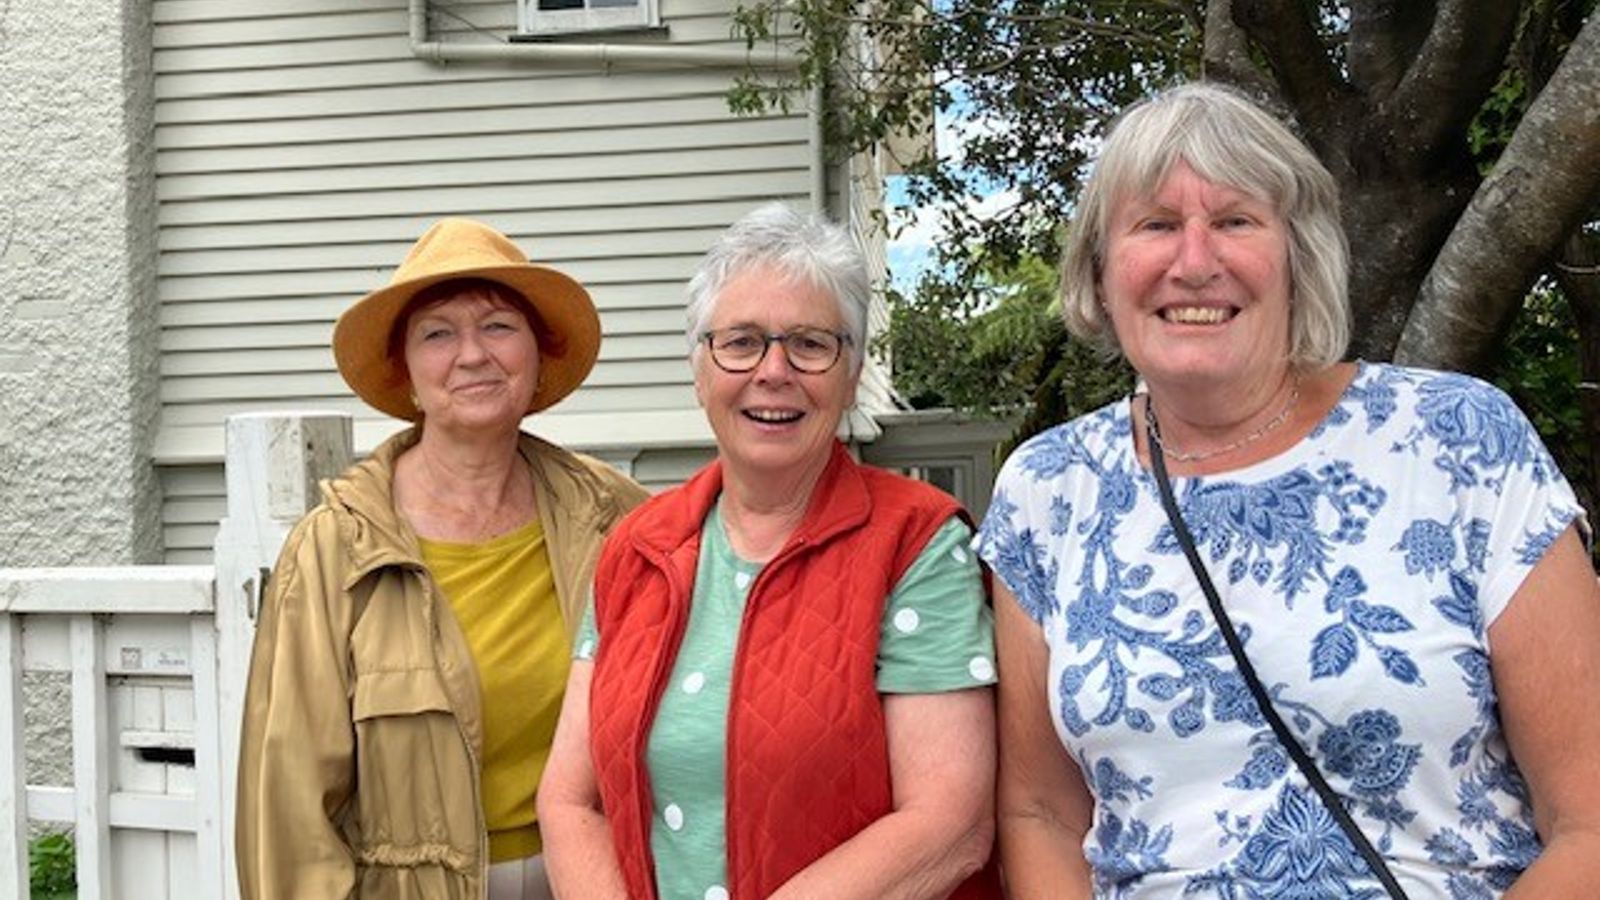 Annette Pearson, Margaret Pointer and Ruth Smidt pictured in front of house. 